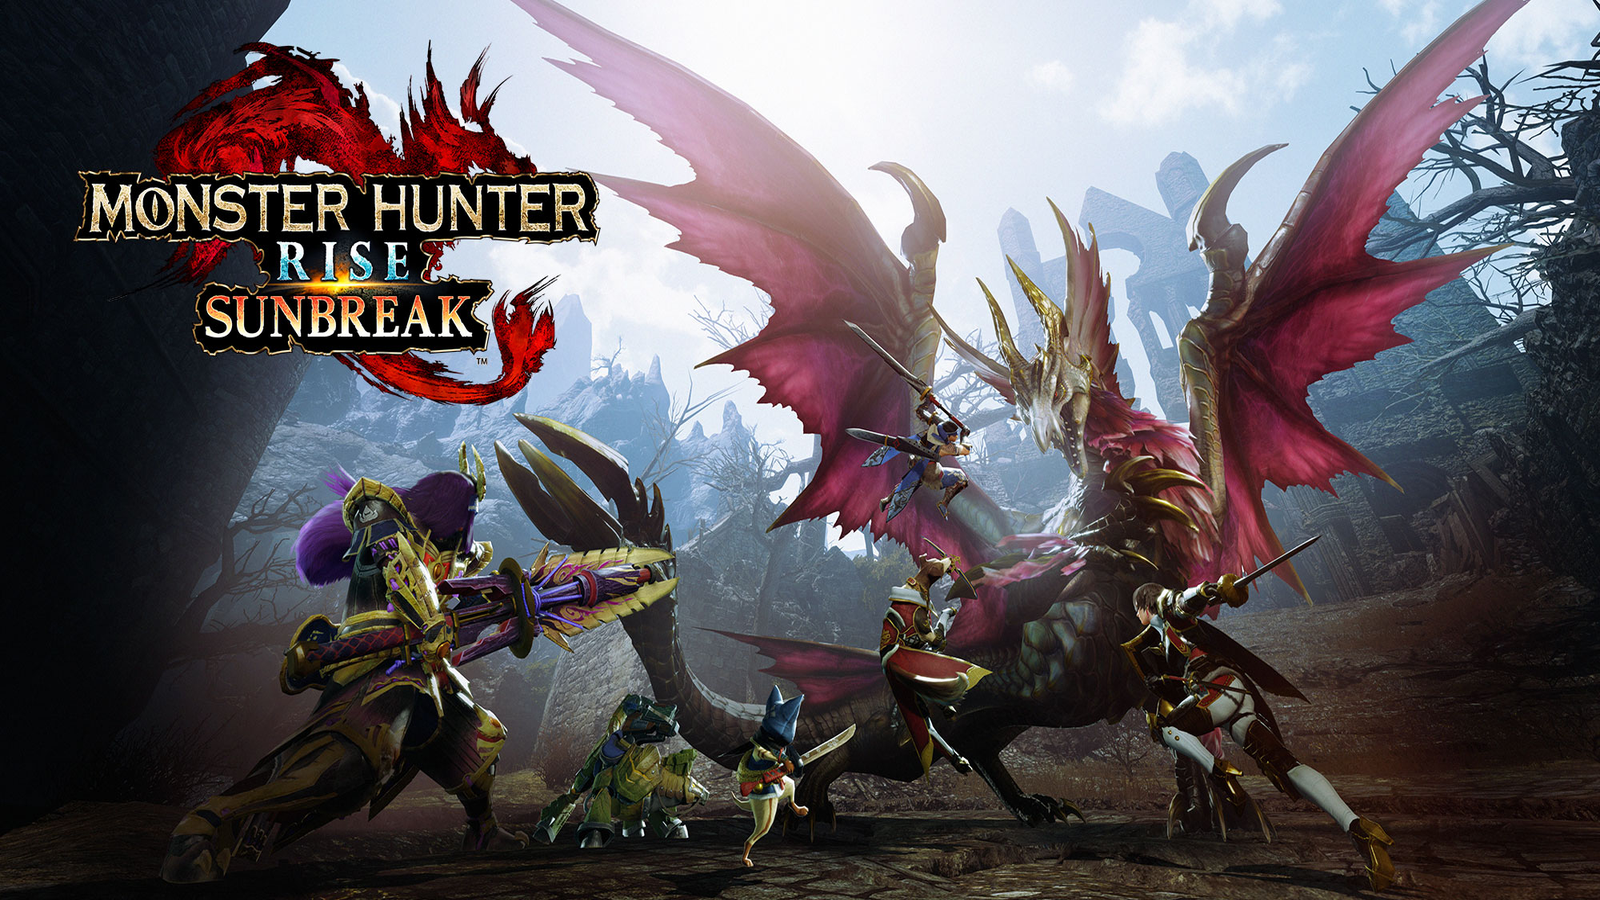 Is Monster Hunter Rise Better or Worse than Capcom's Previous